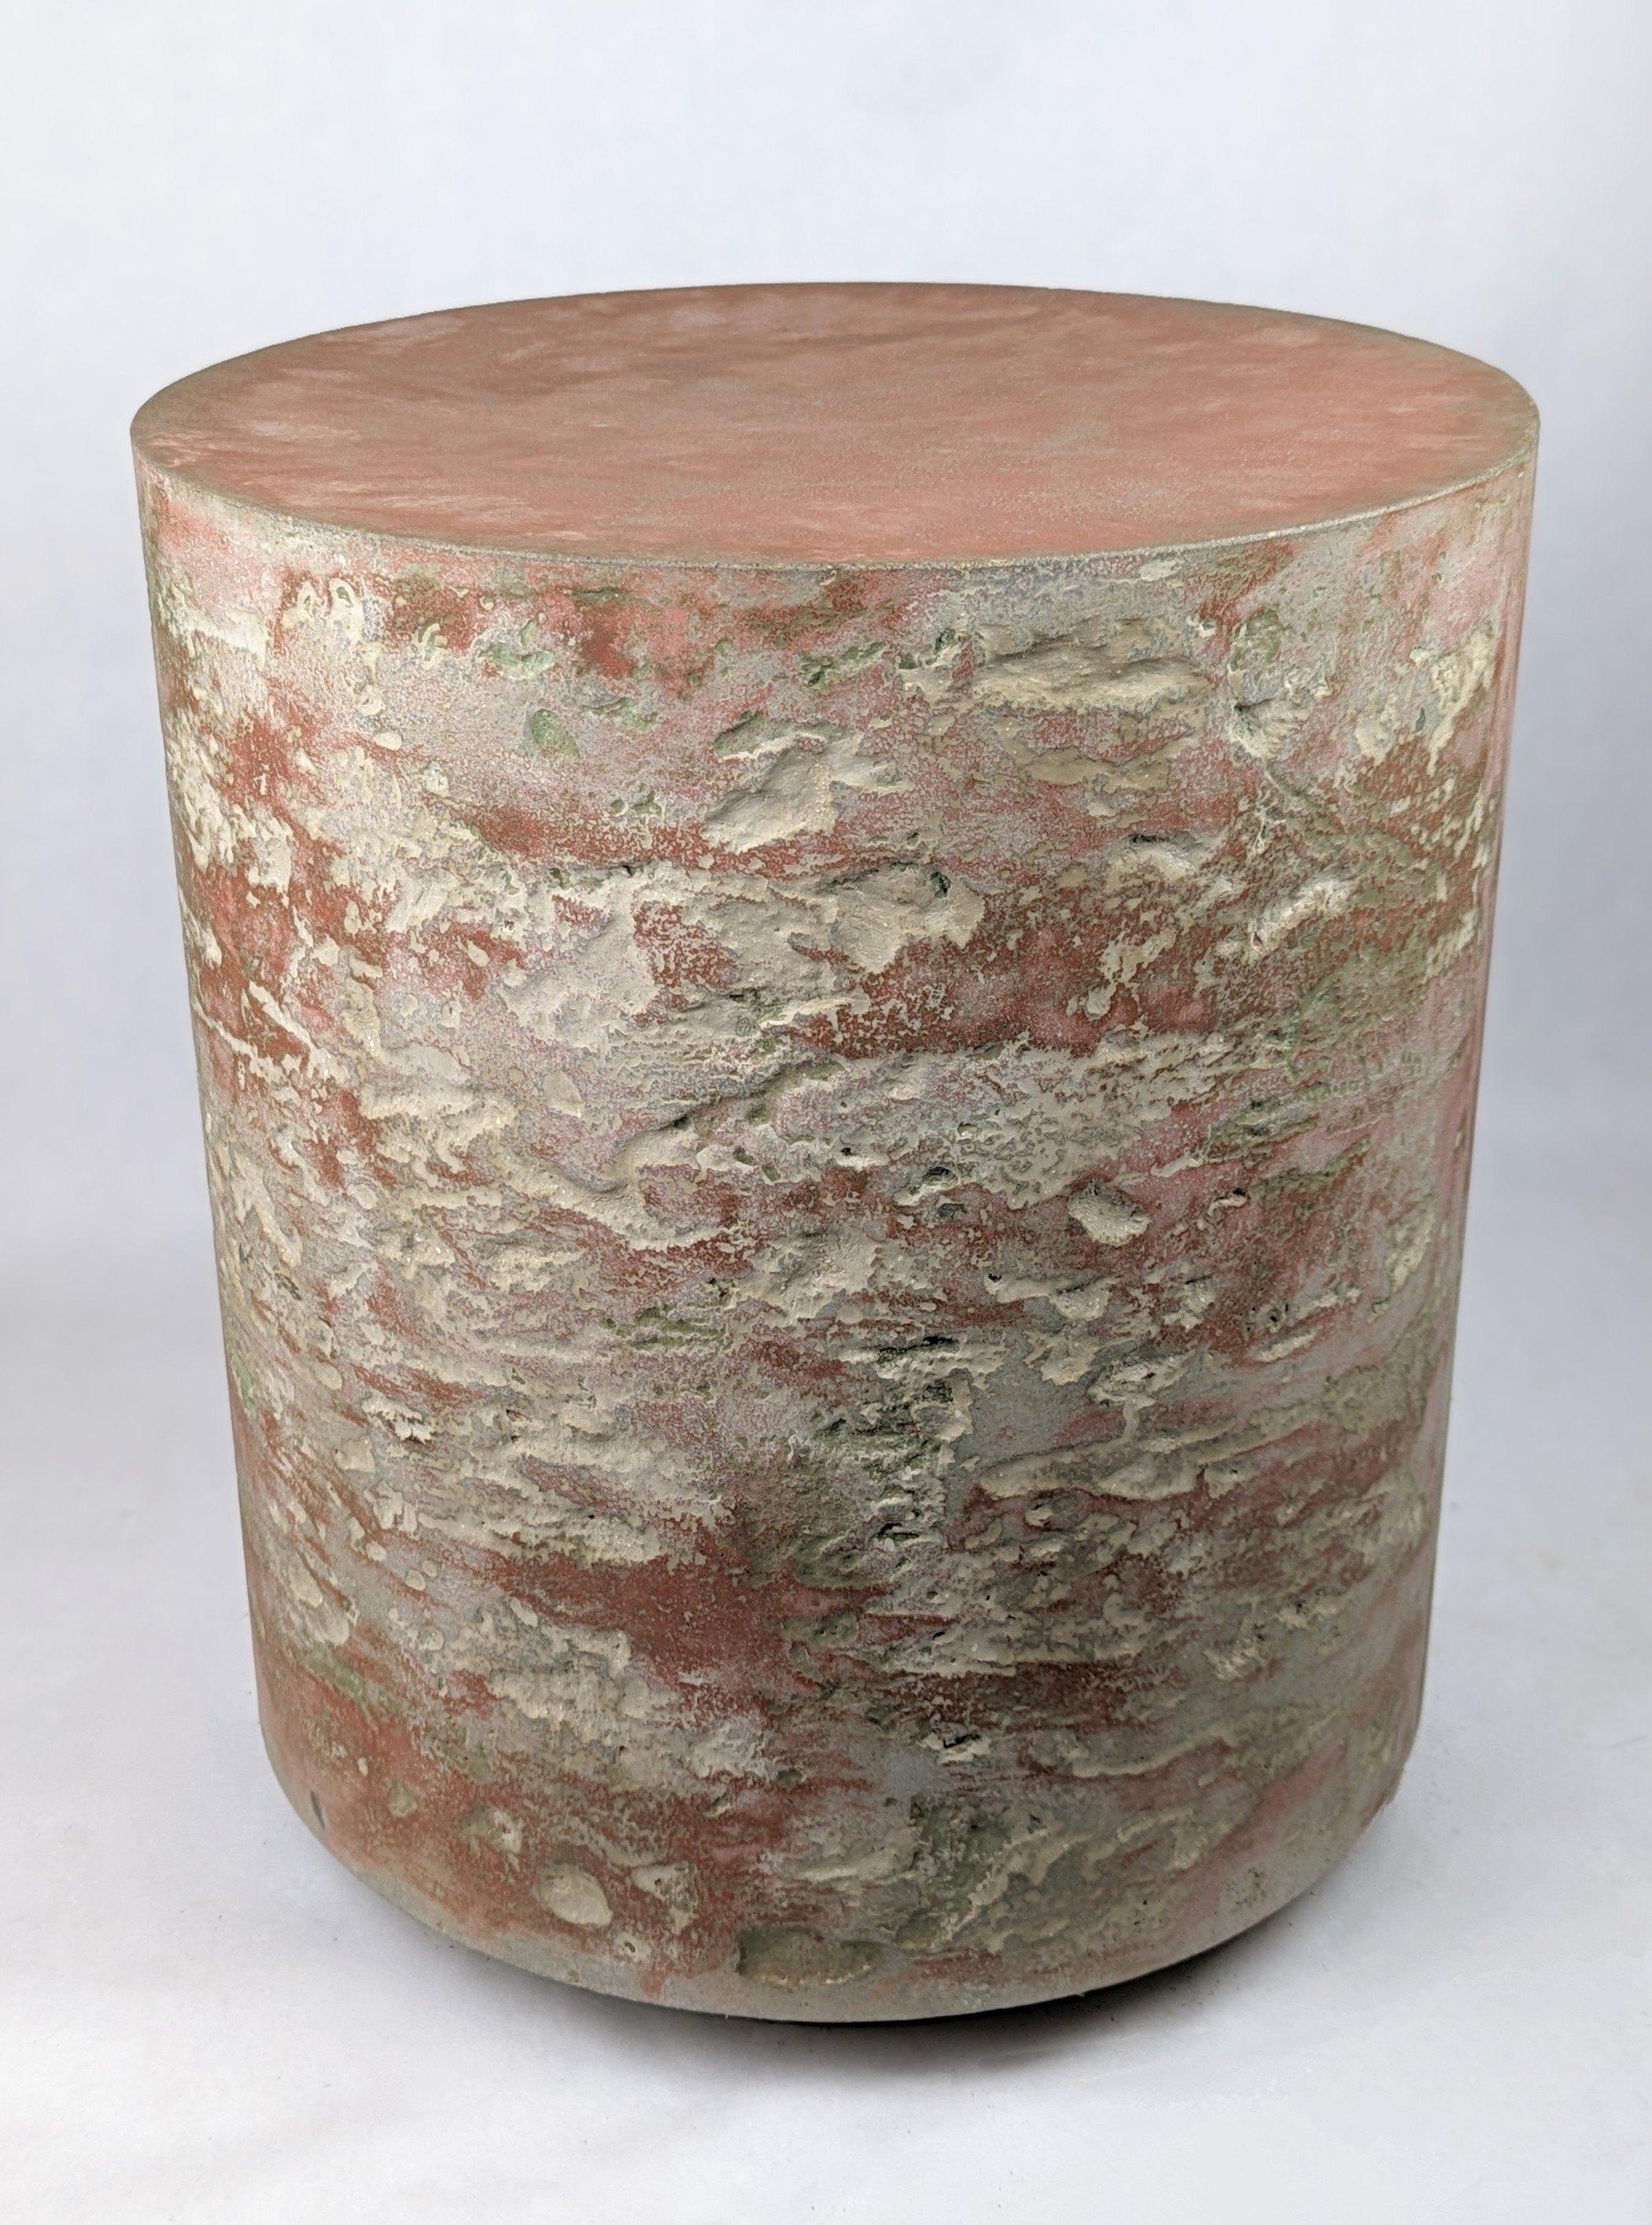 American Geological Light MTO Red and Green Concrete Art Stool, 'Lichen on Mars' For Sale